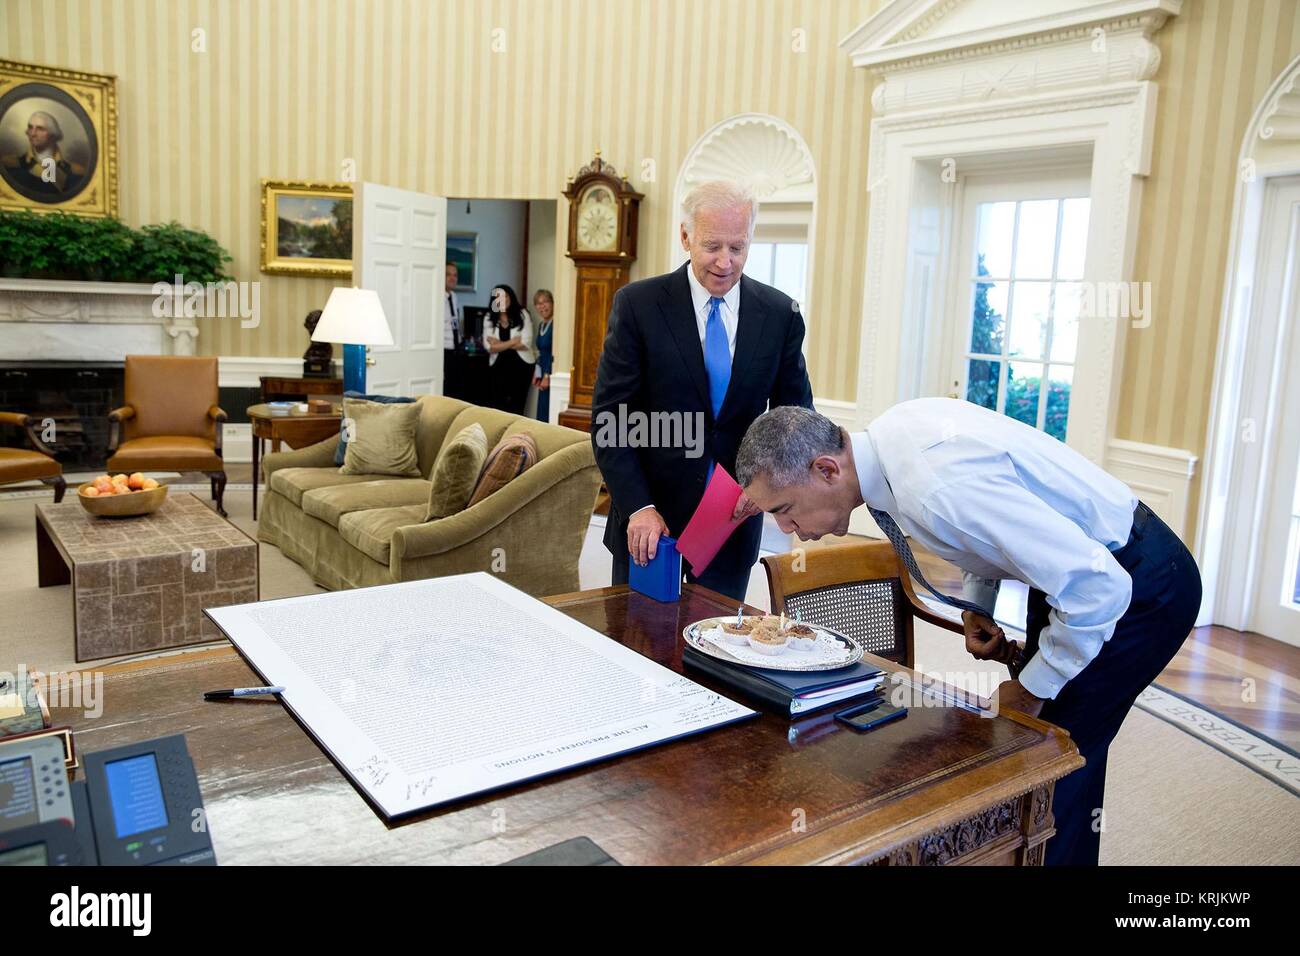 U.S. Vice President Joe Biden looks on as U.S. President Barack Obama blows out birthday candles White House Oval Office August 4, 2016 in Washington, DC. Stock Photo